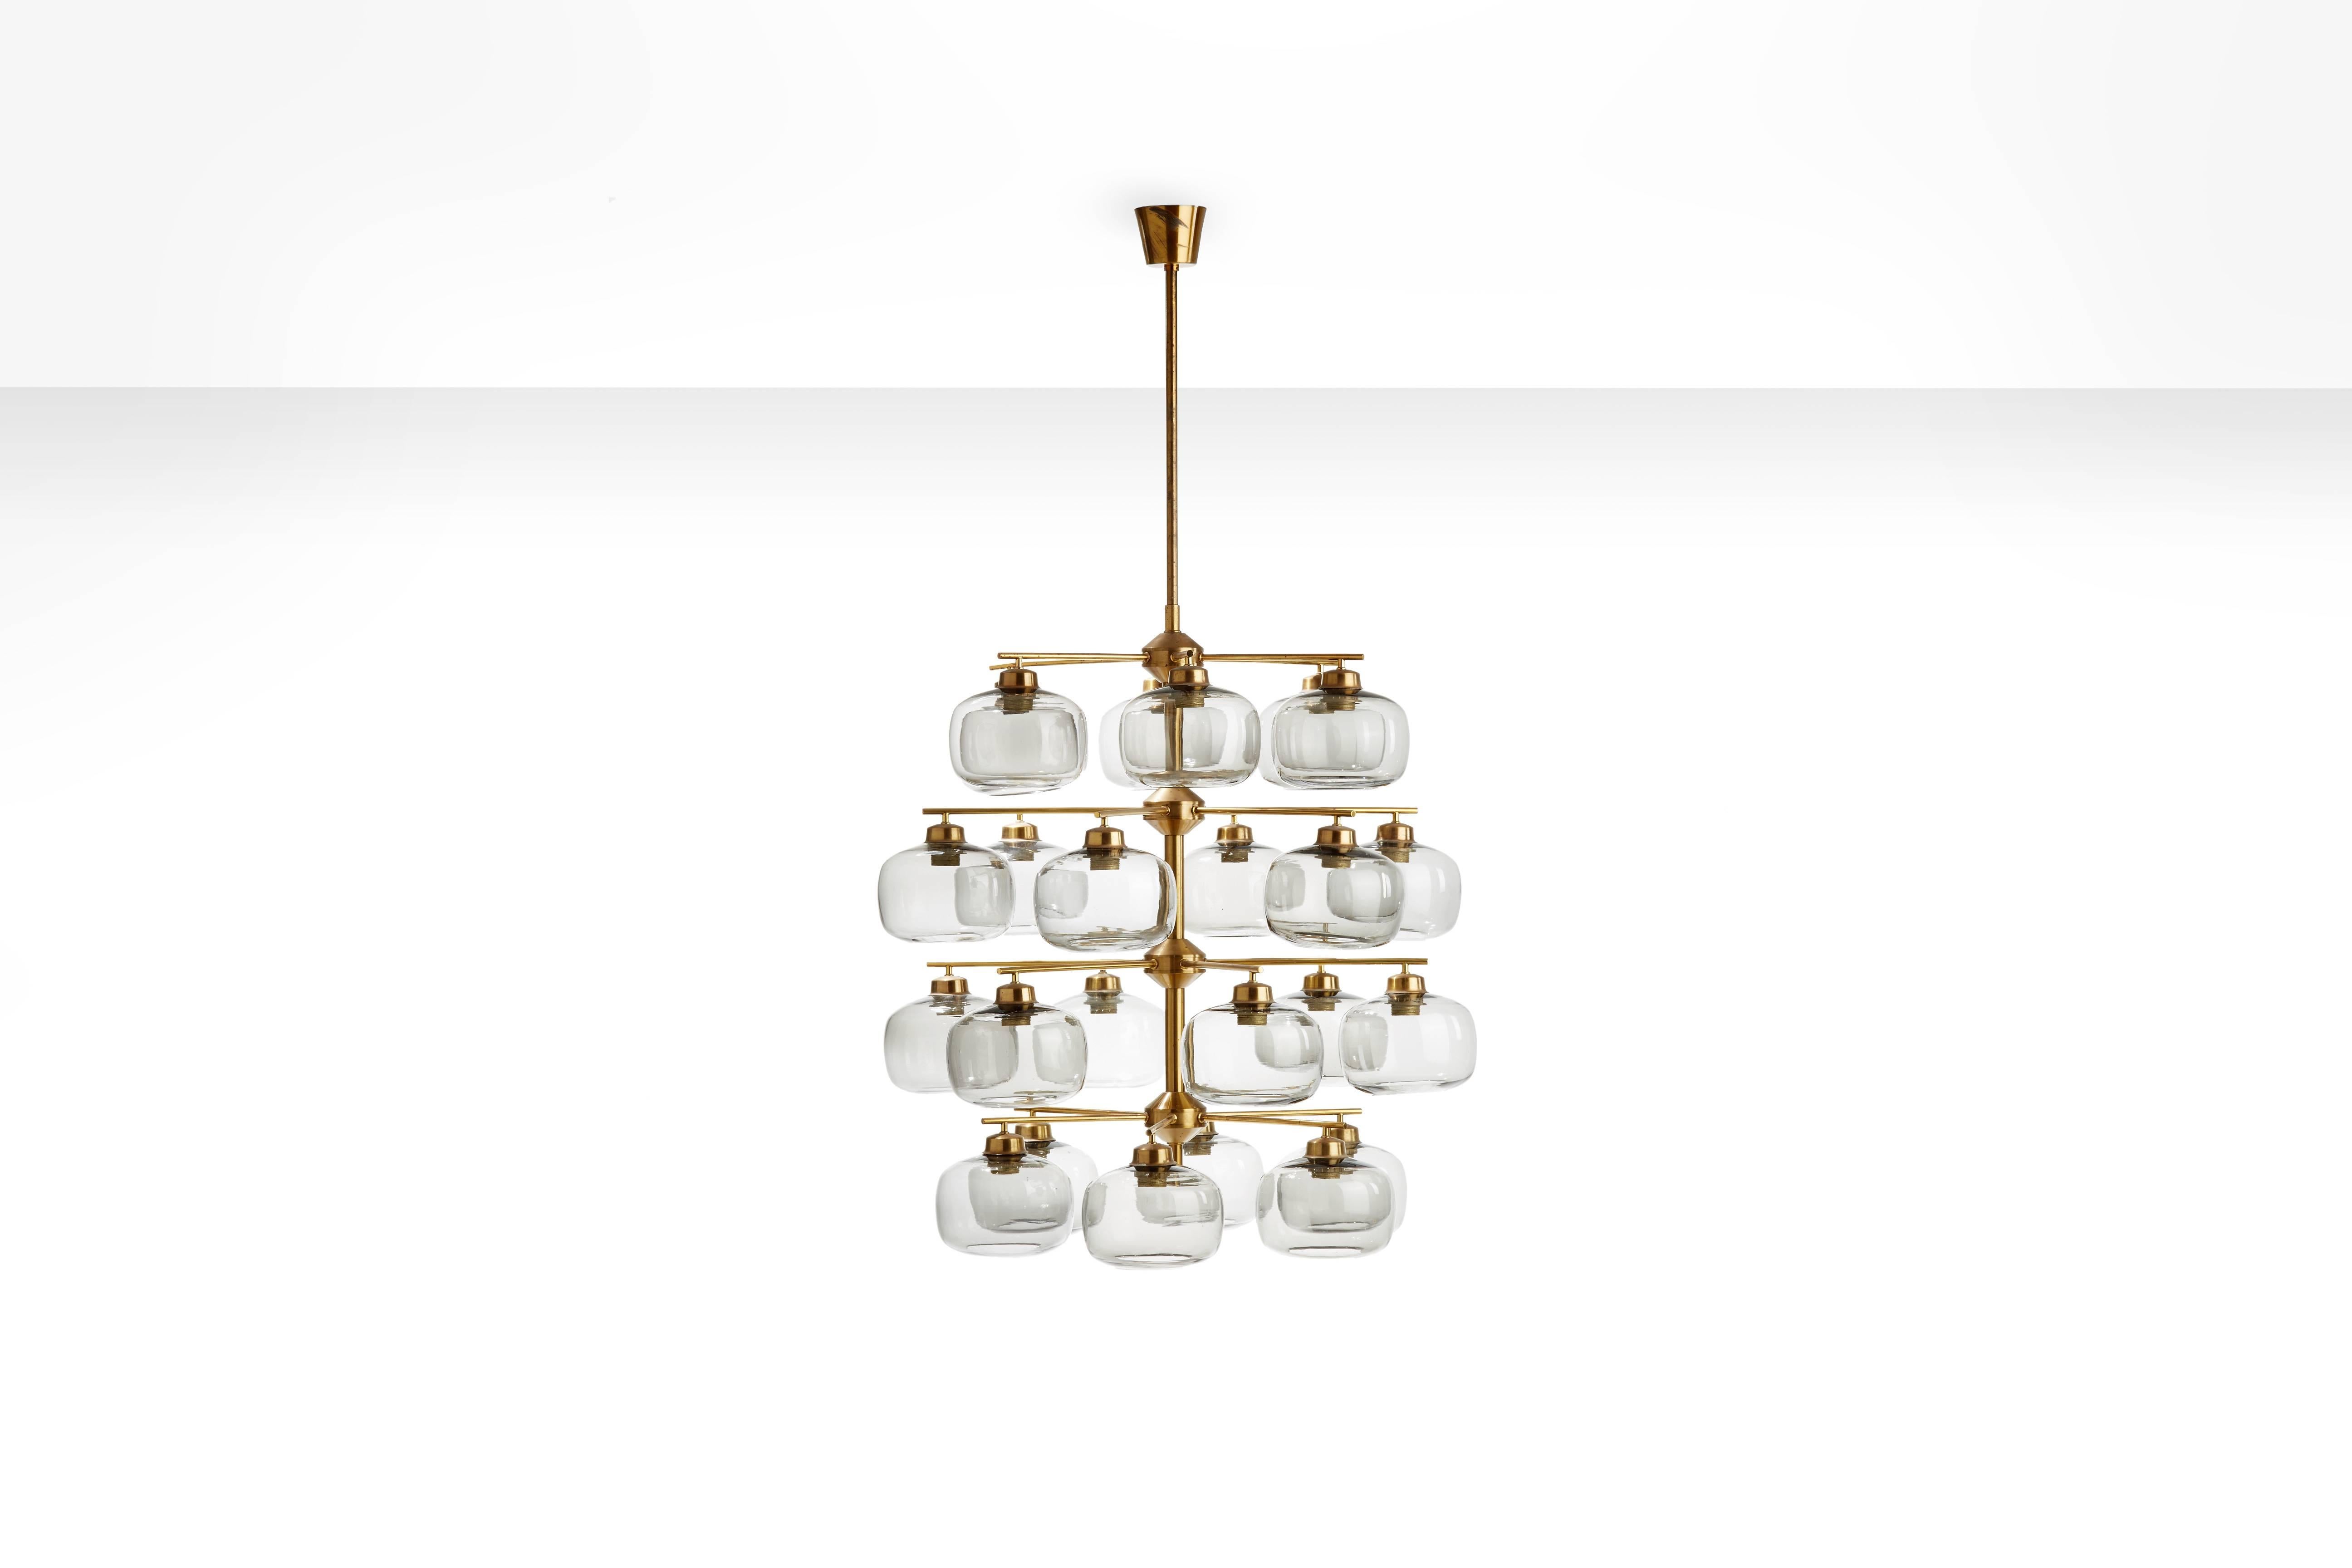 Scandinavian Modern Pair of Midcentury Chandeliers with 24 Smoked Glass Shades by Holger Johansson